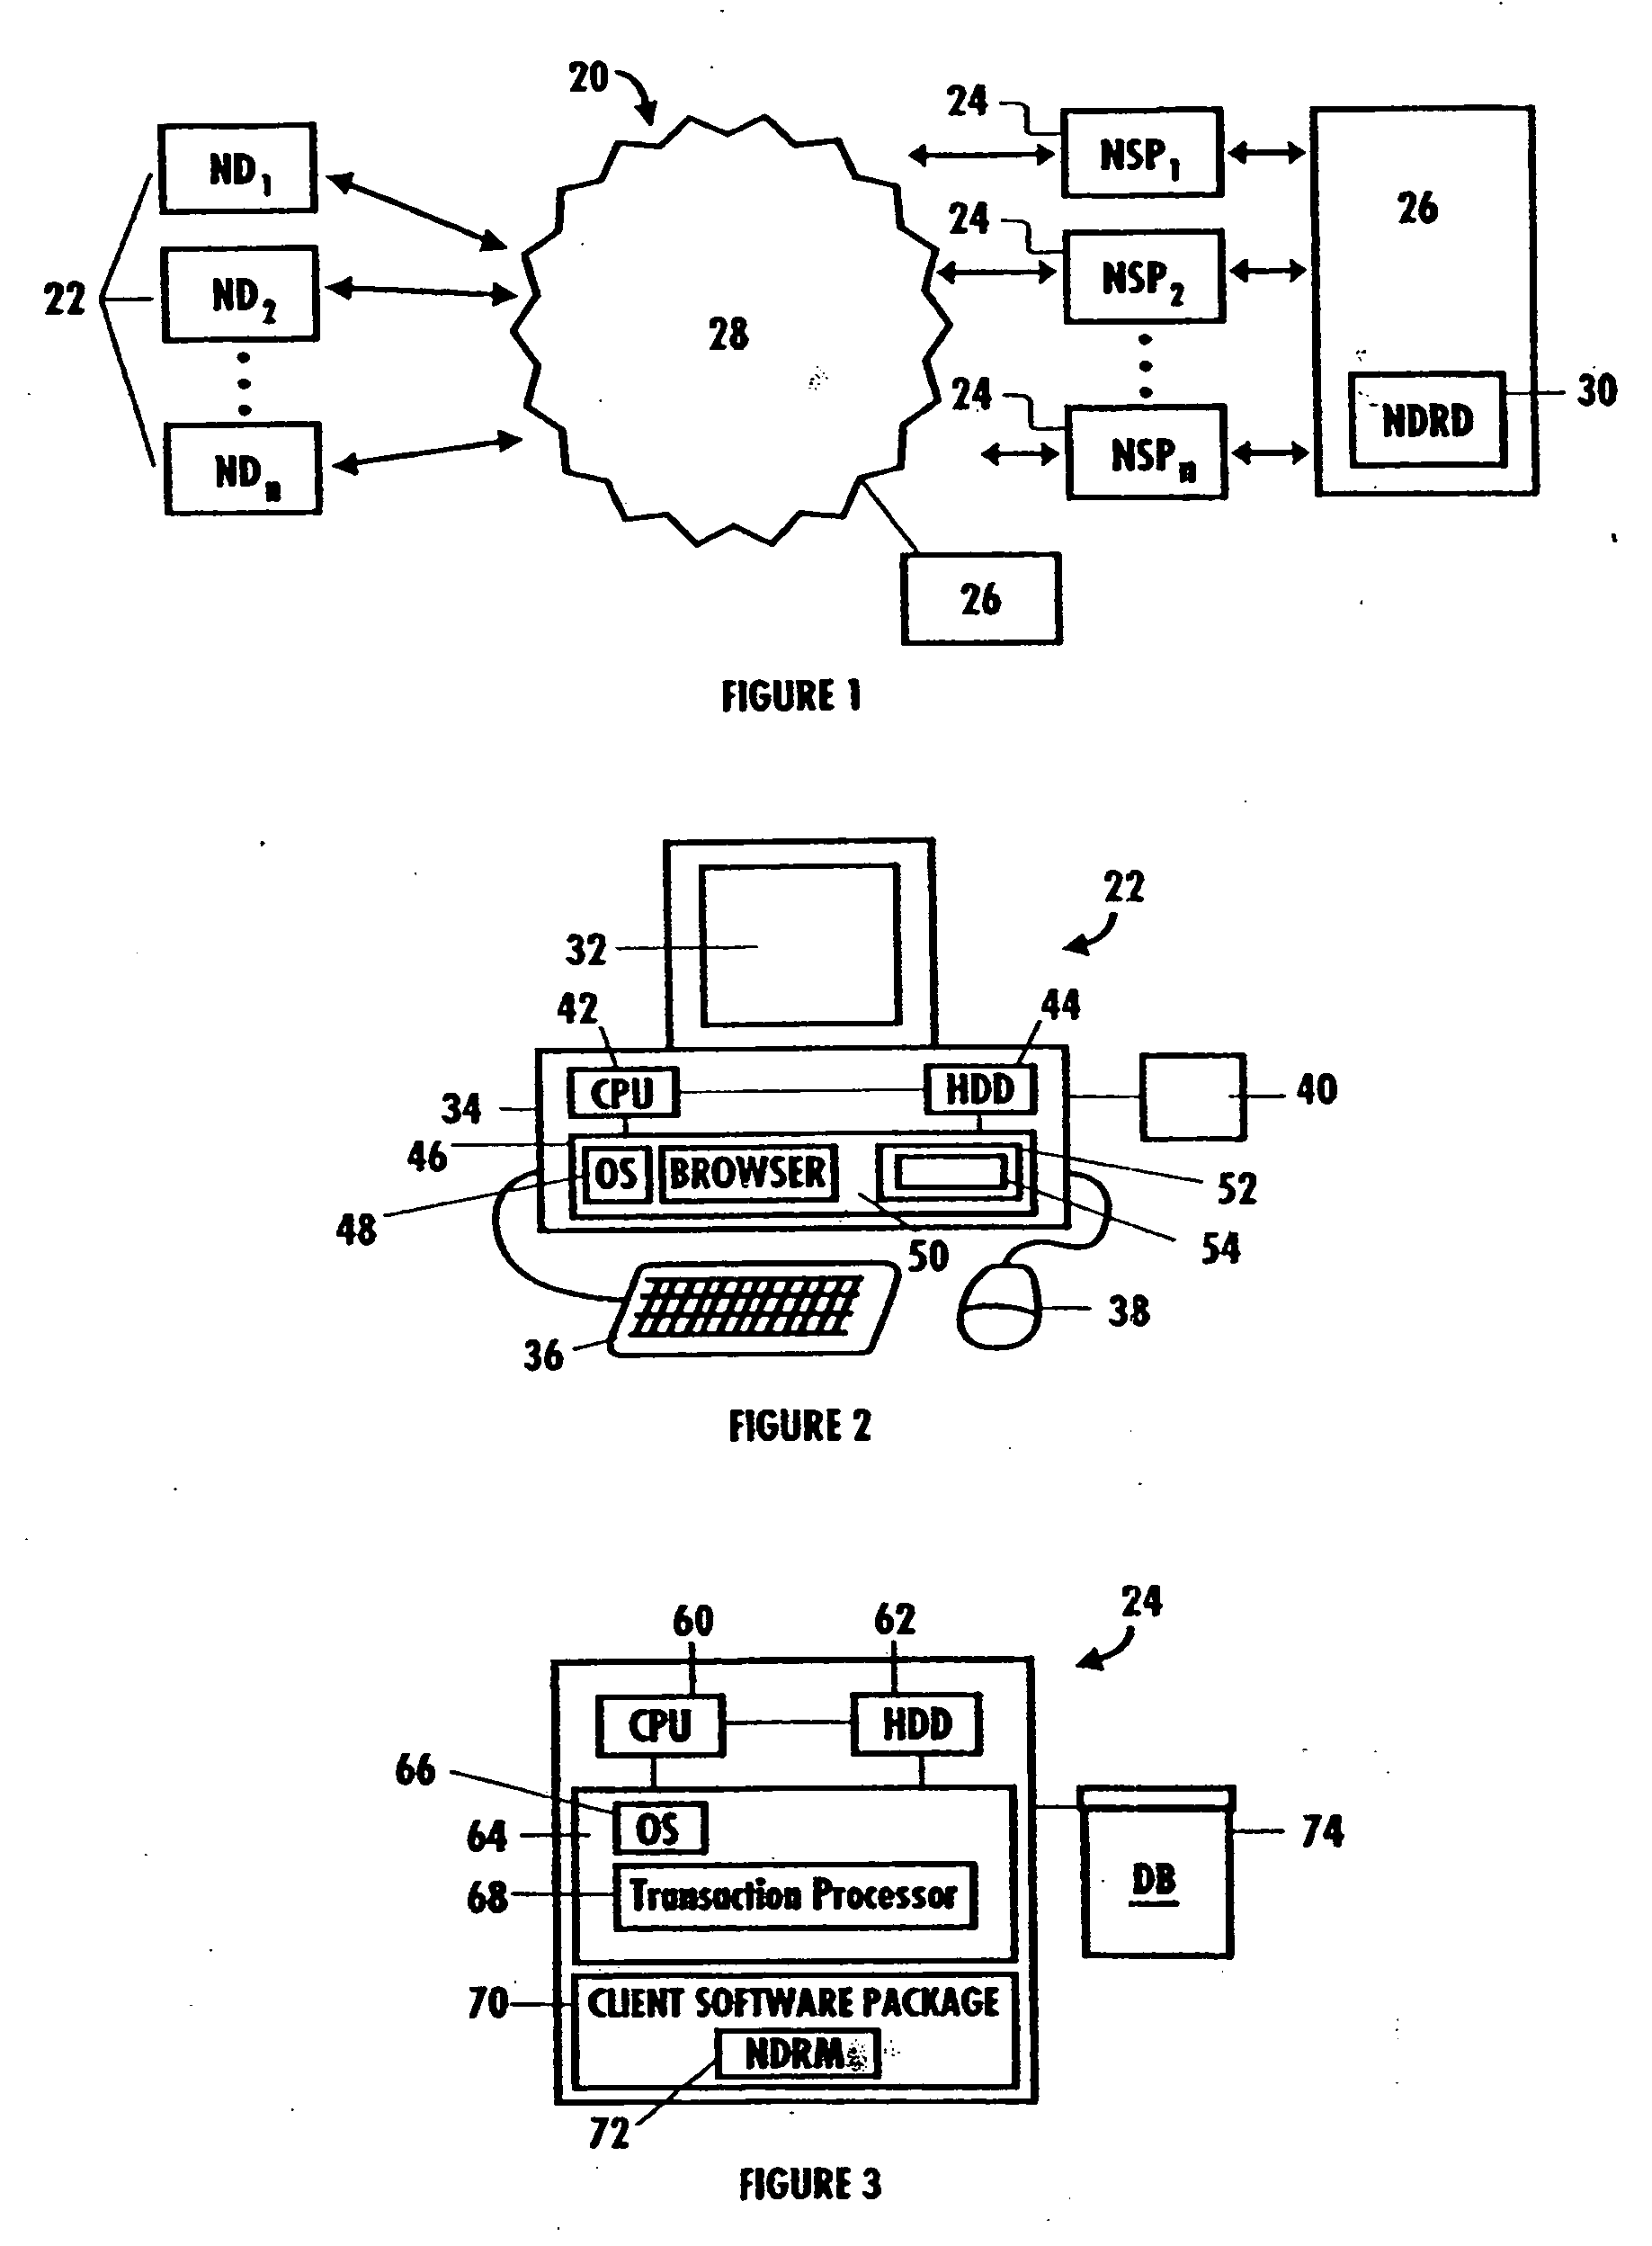 Network security and fraud detection system and method